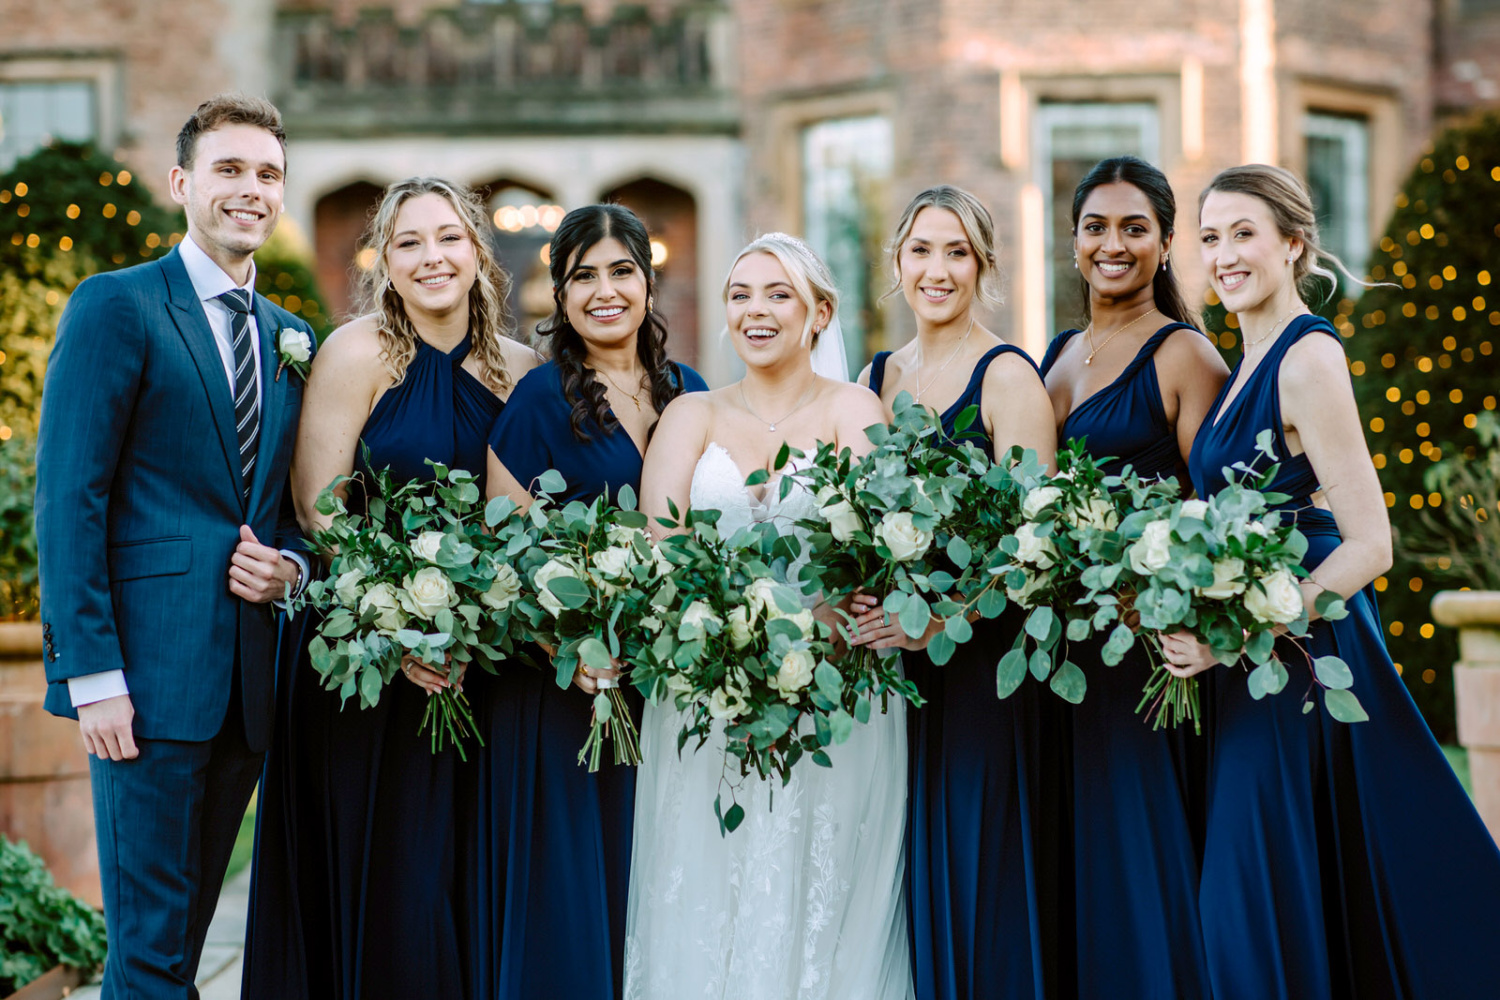 A group of bridesmaids and groomsmen pose for a photo at the wedding at Rowton Castle.